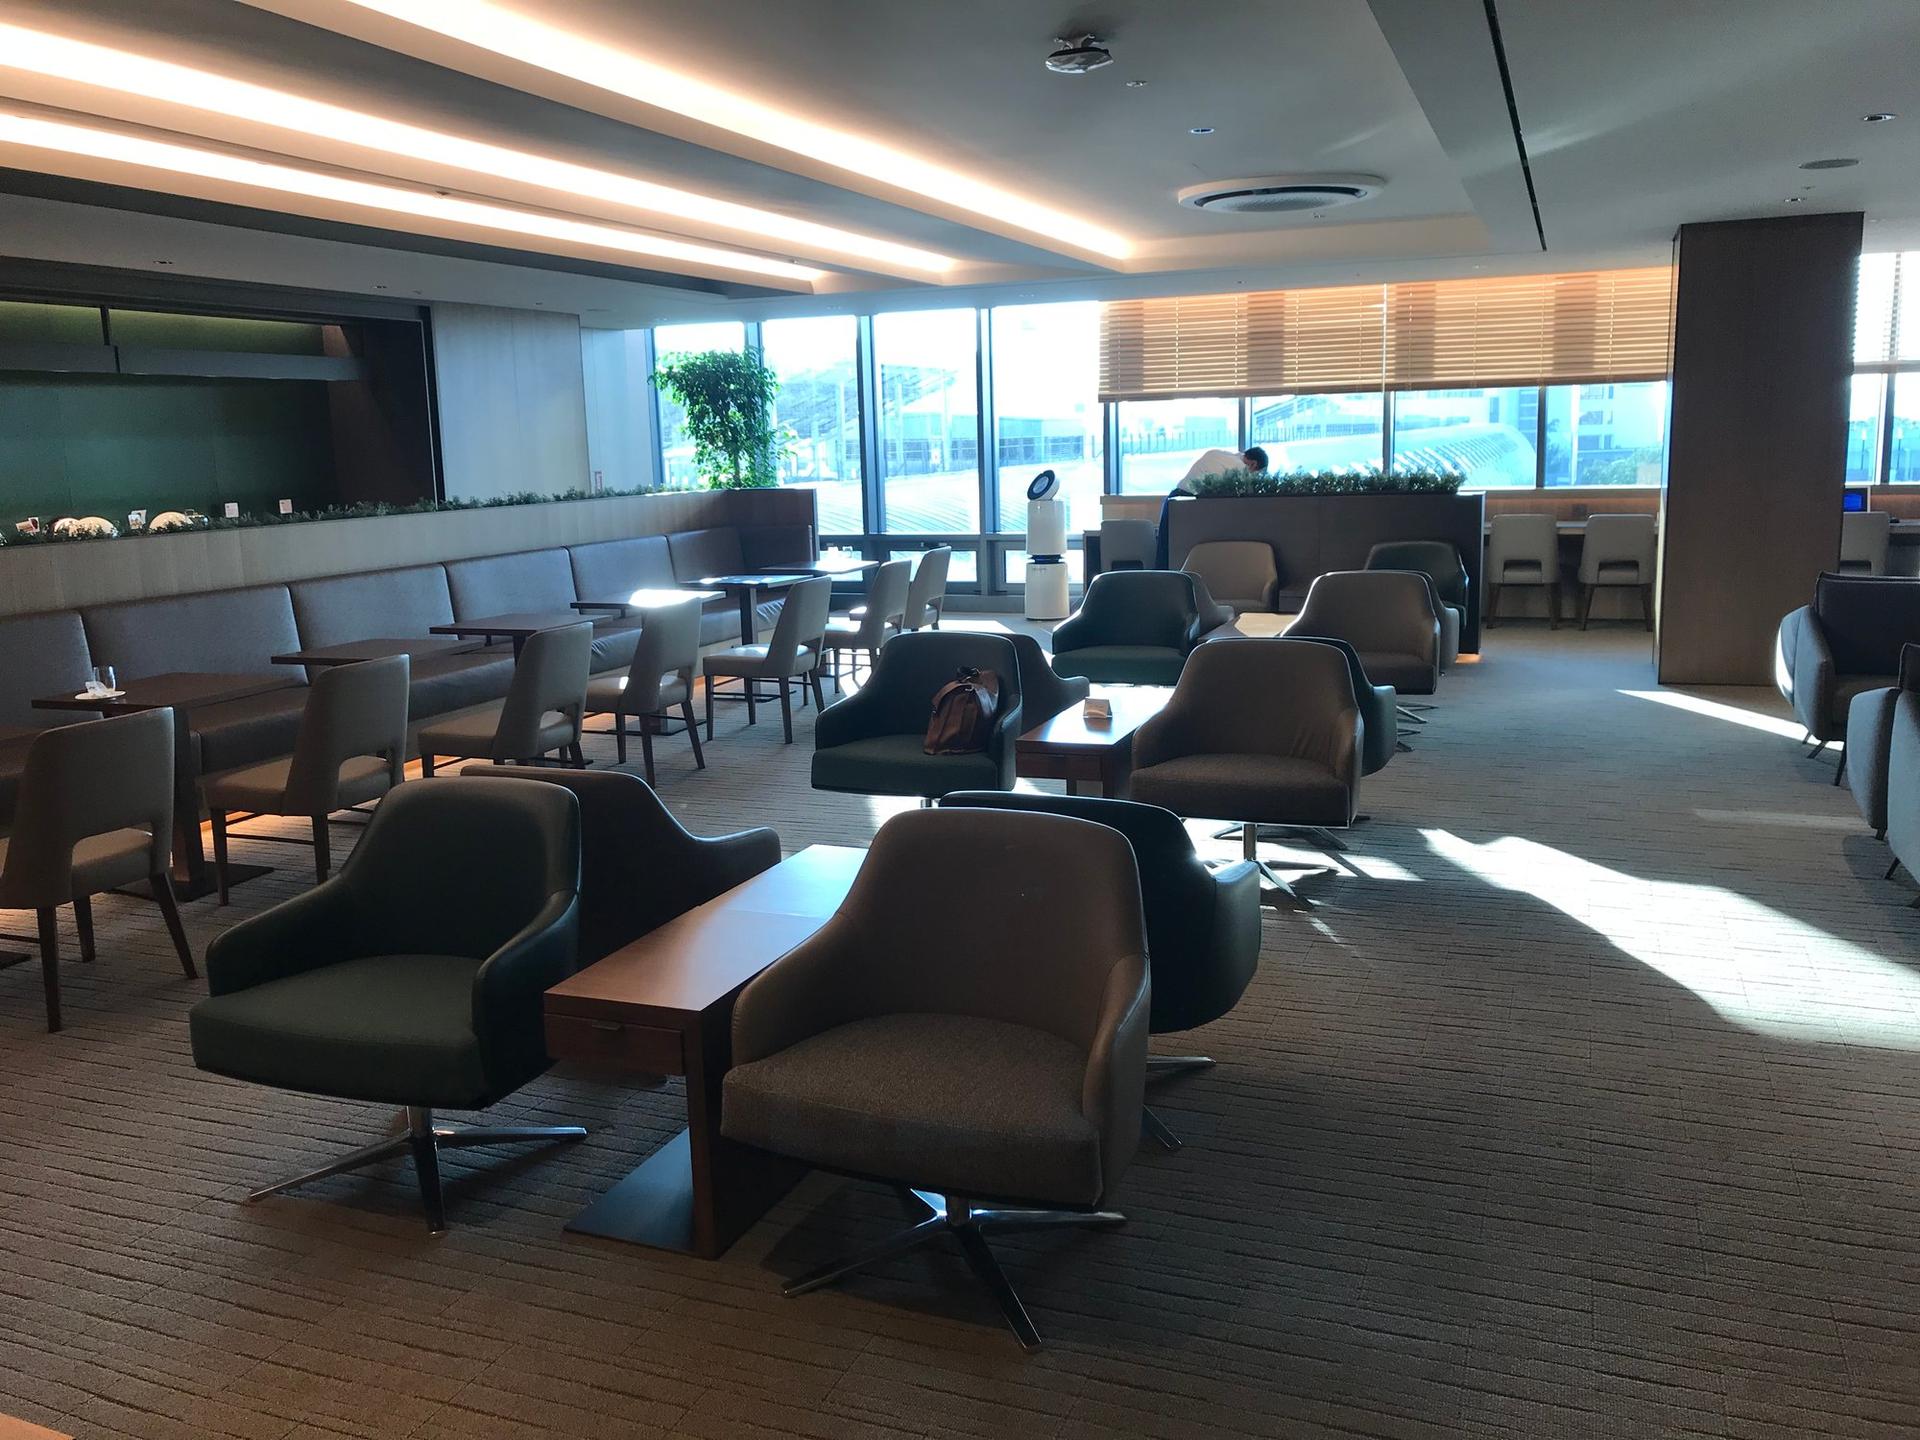 Asiana Airlines Lounge image 10 of 24